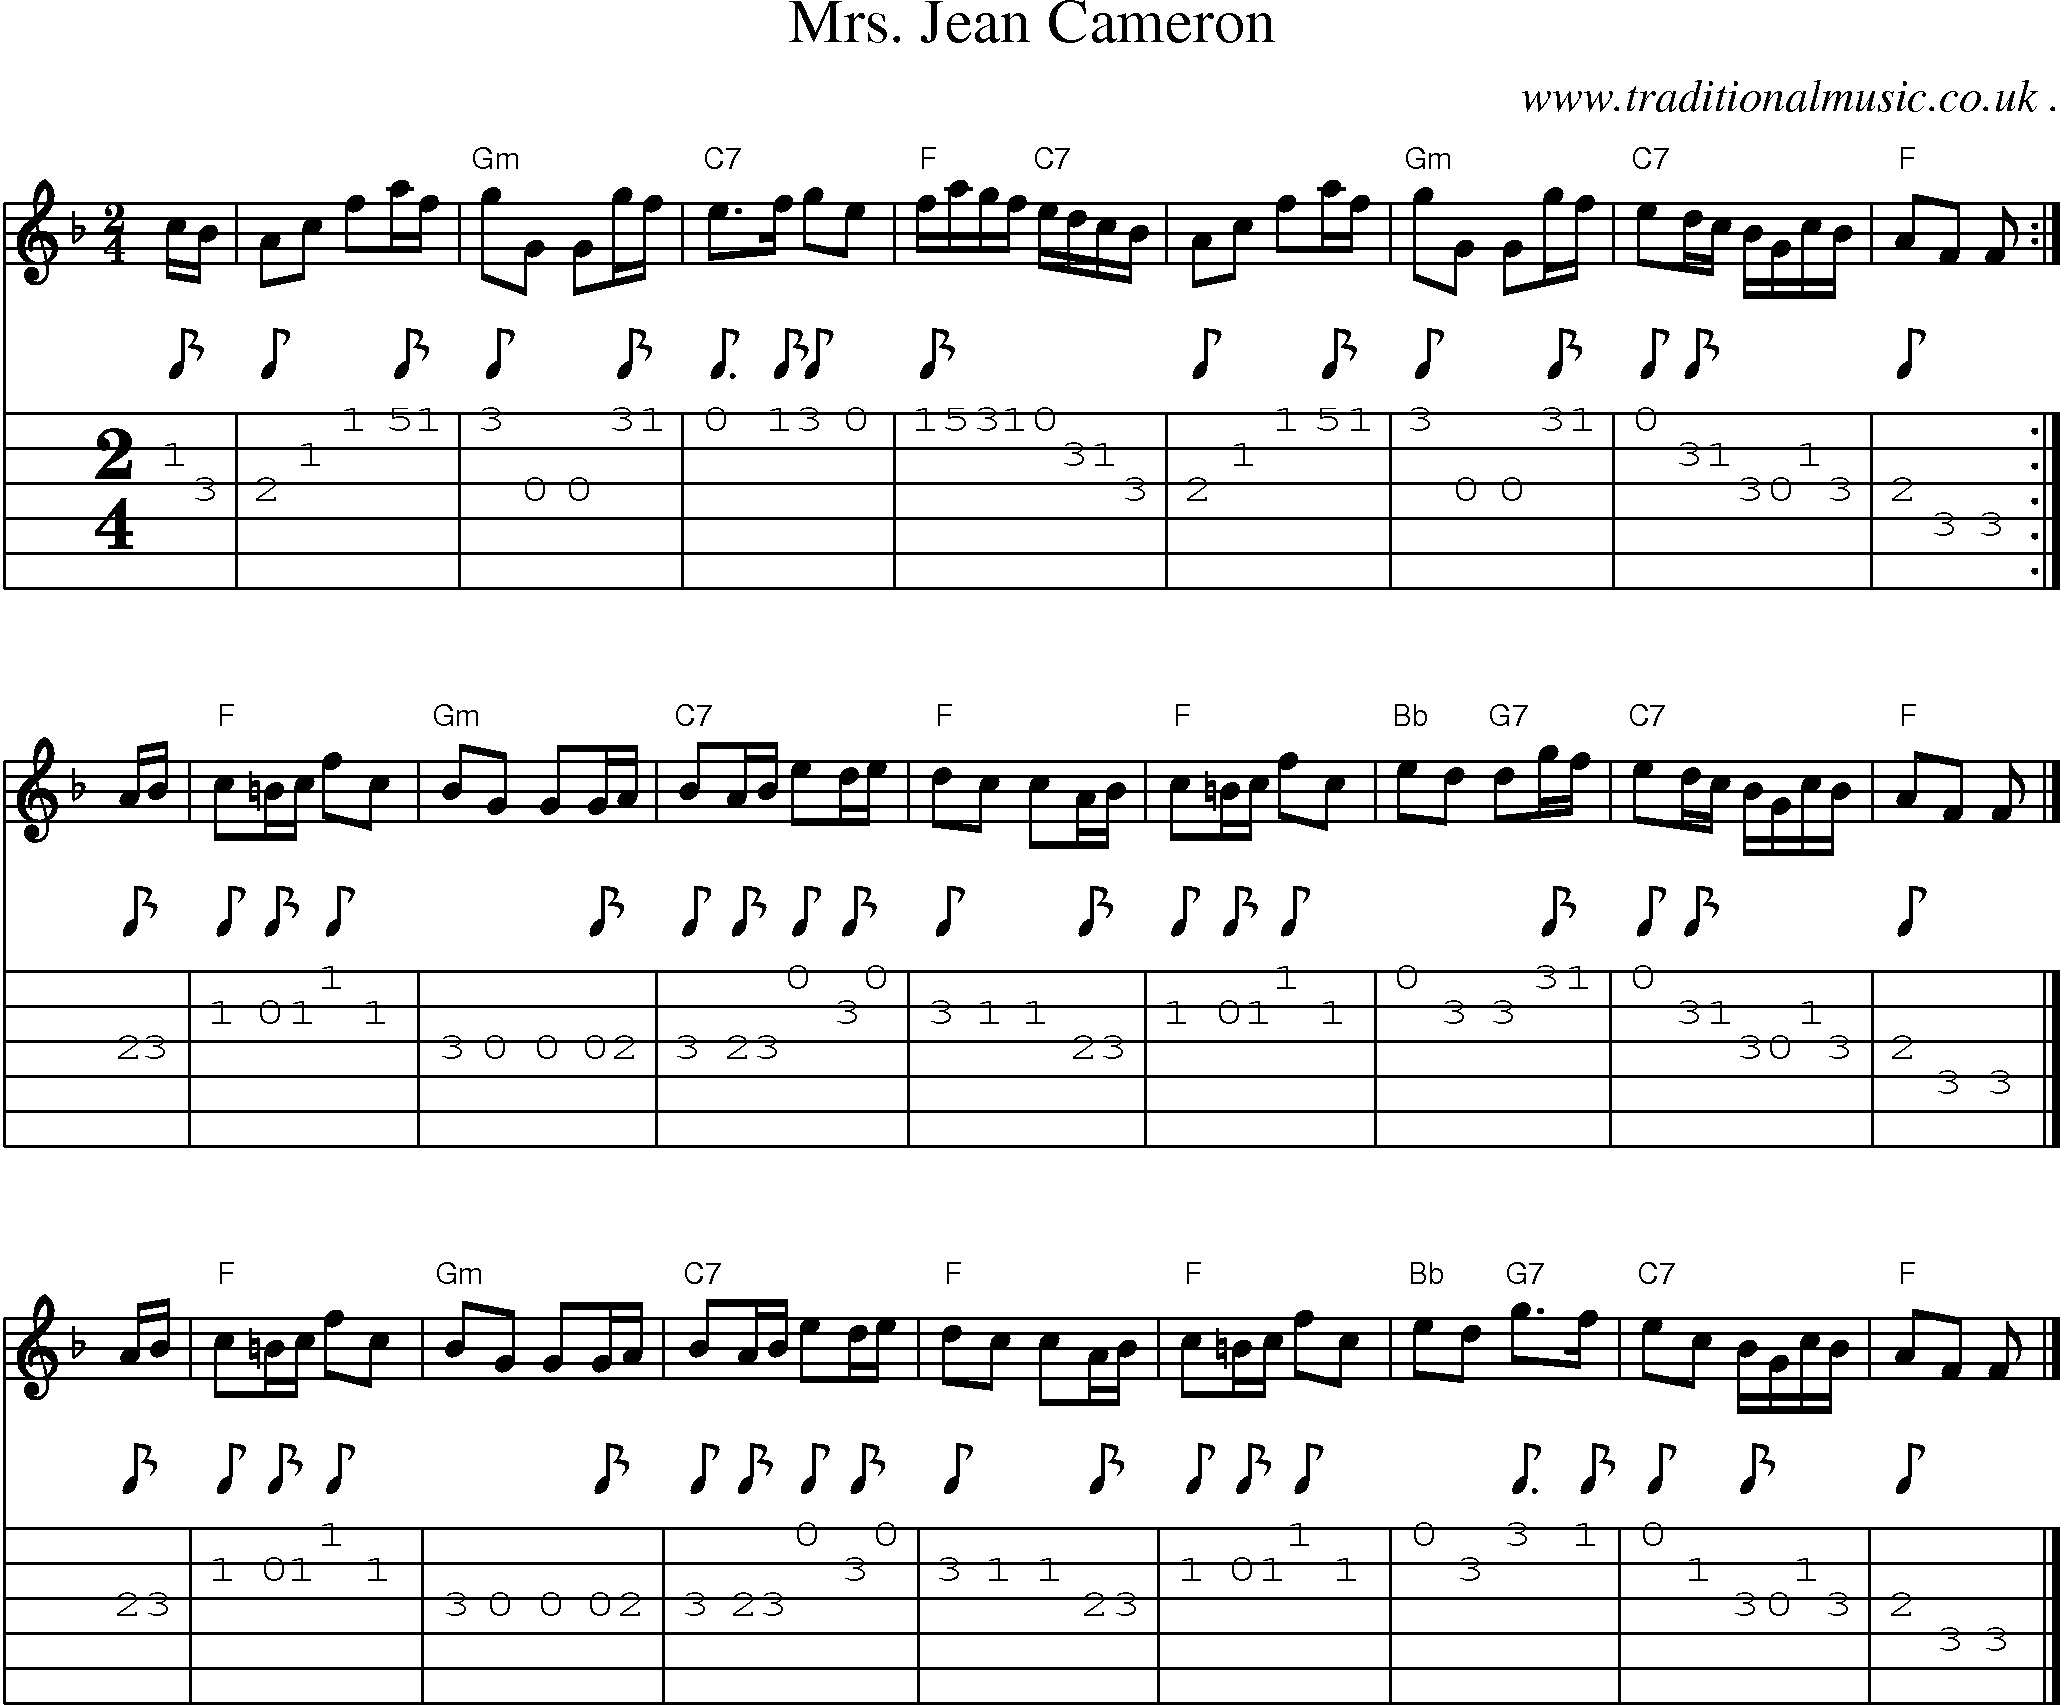 Sheet-music  score, Chords and Guitar Tabs for Mrs Jean Cameron